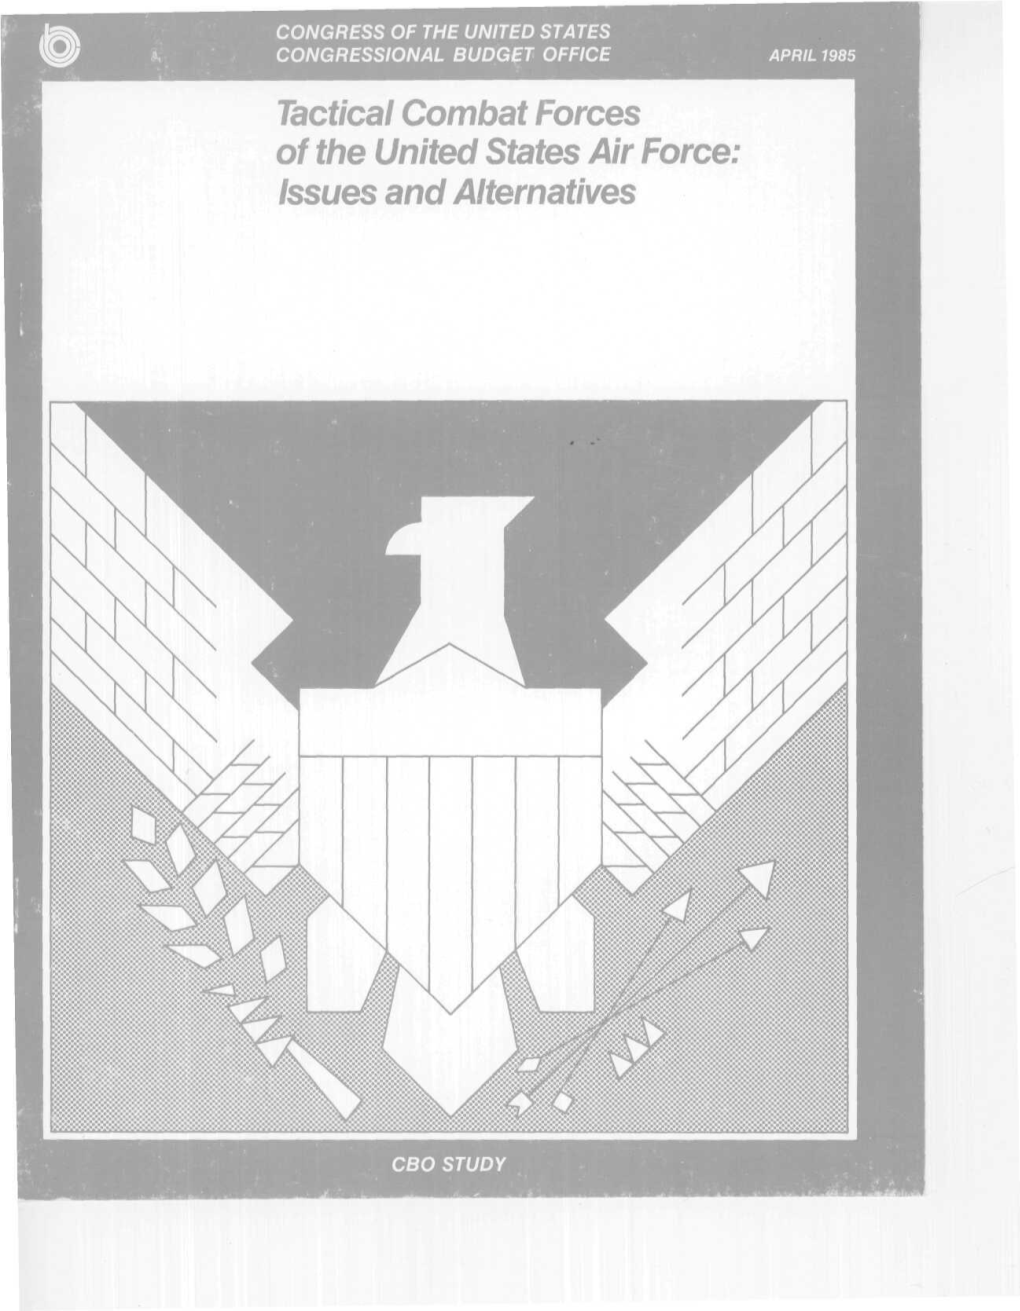 Tactical Combat Forces of the United States Air Force: Issues and Alternatives